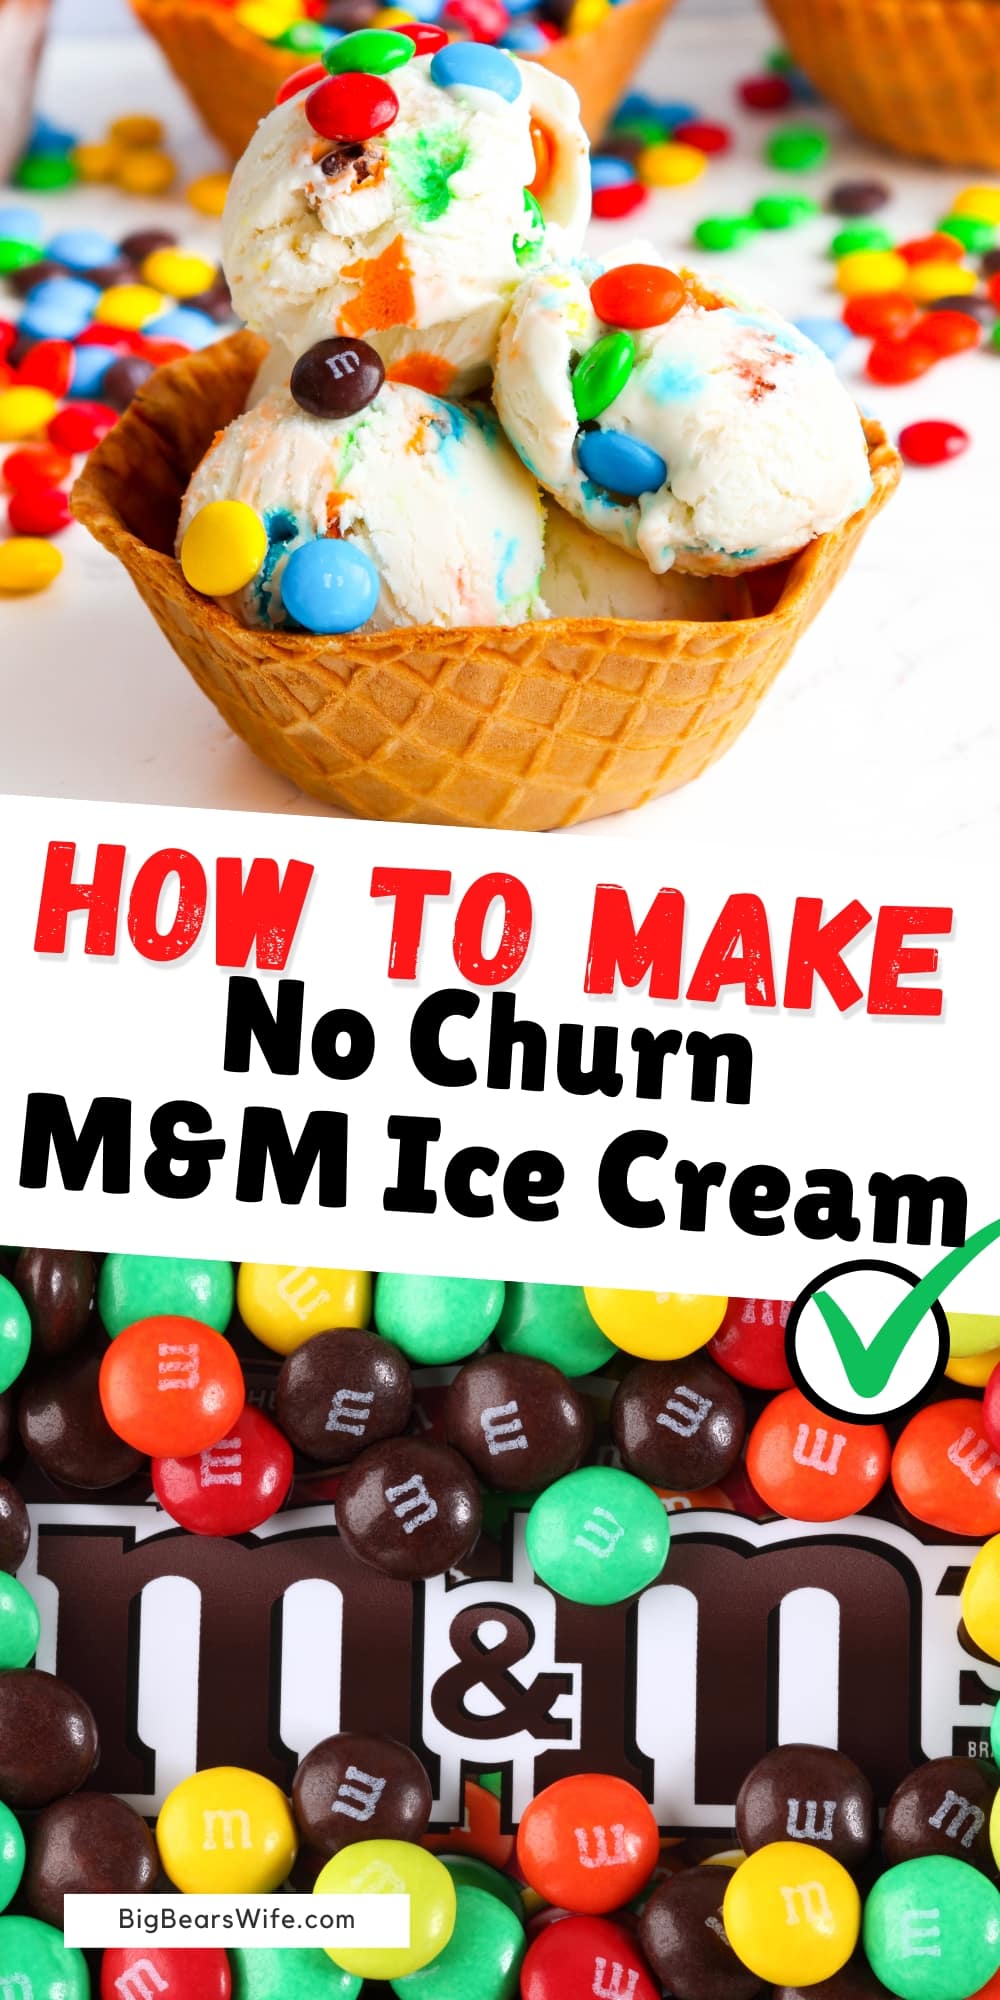 With hot summer months right around the corner, it's time to start thinking about refreshing and indulgent desserts. Enter no churn M&M ice cream - the perfect way to cool off and satisfy your sweet tooth. via @bigbearswife